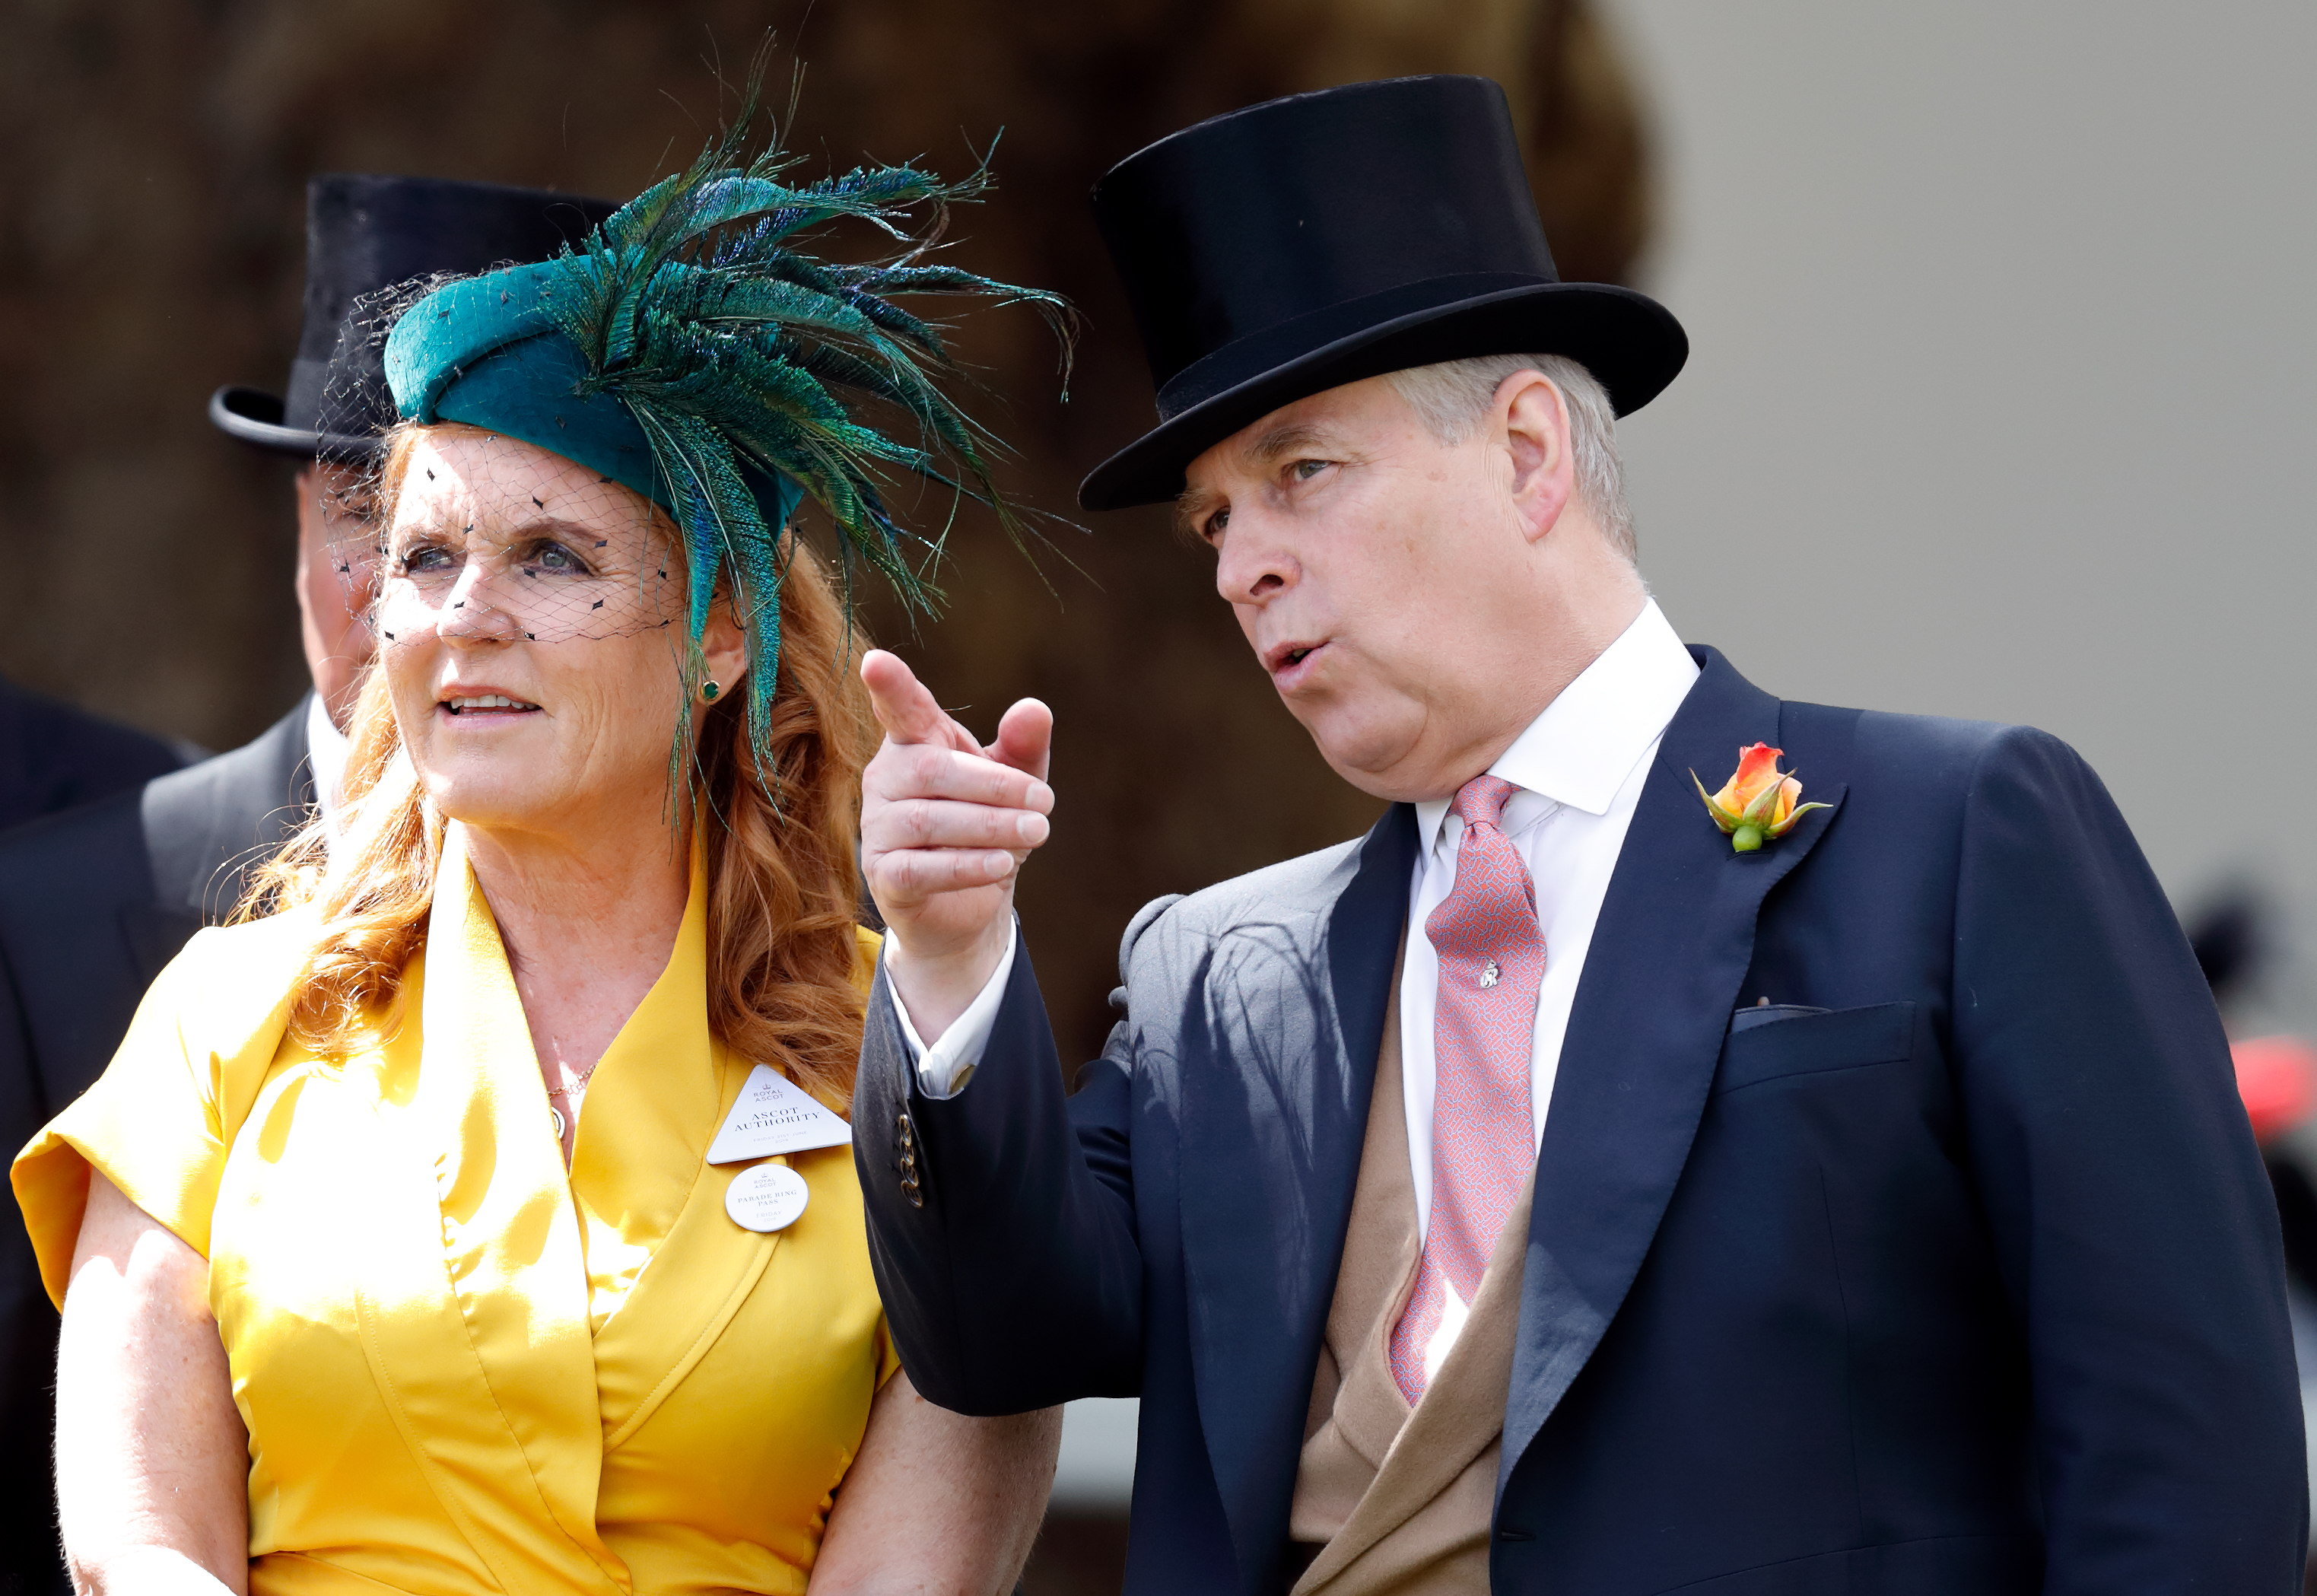 Sarah Ferguson, Duchess of York and Prince Andrew, Duke of York on June 21, 2019 in Ascot, England | Source: Getty Images